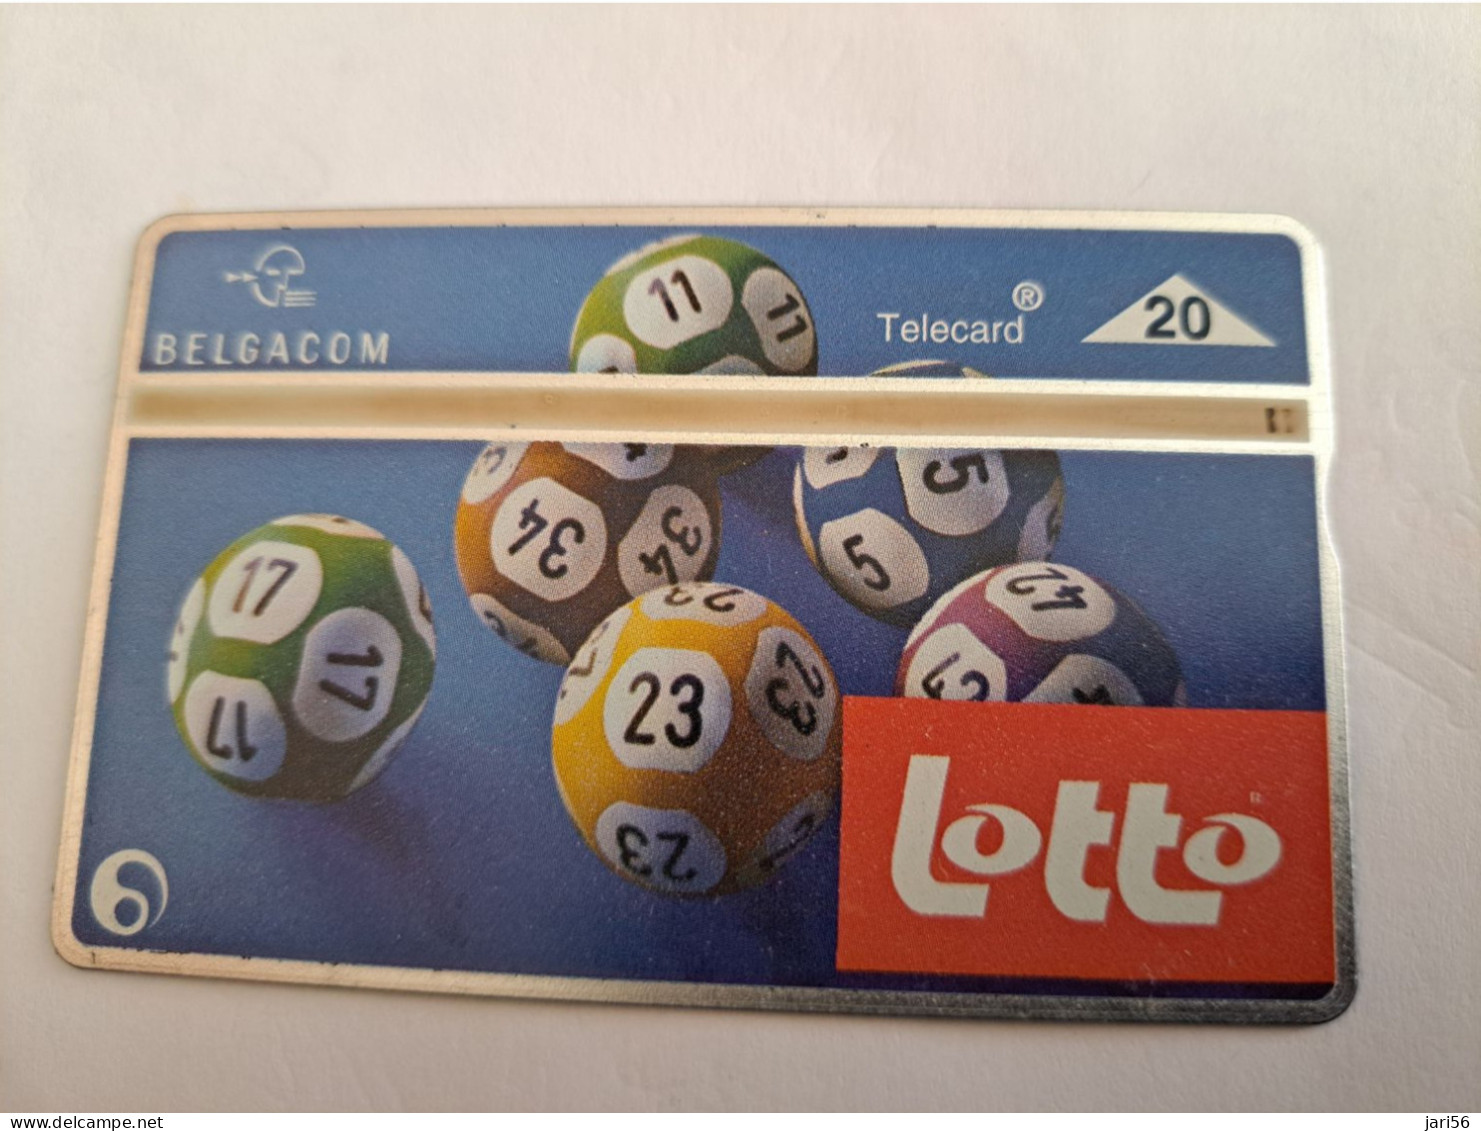 BELGIUM  L & G CARD / LOTTO/ GAMBLING   /  /610B  / CARD 20 UNITS  / USED CARD     ** 15034** - With Chip